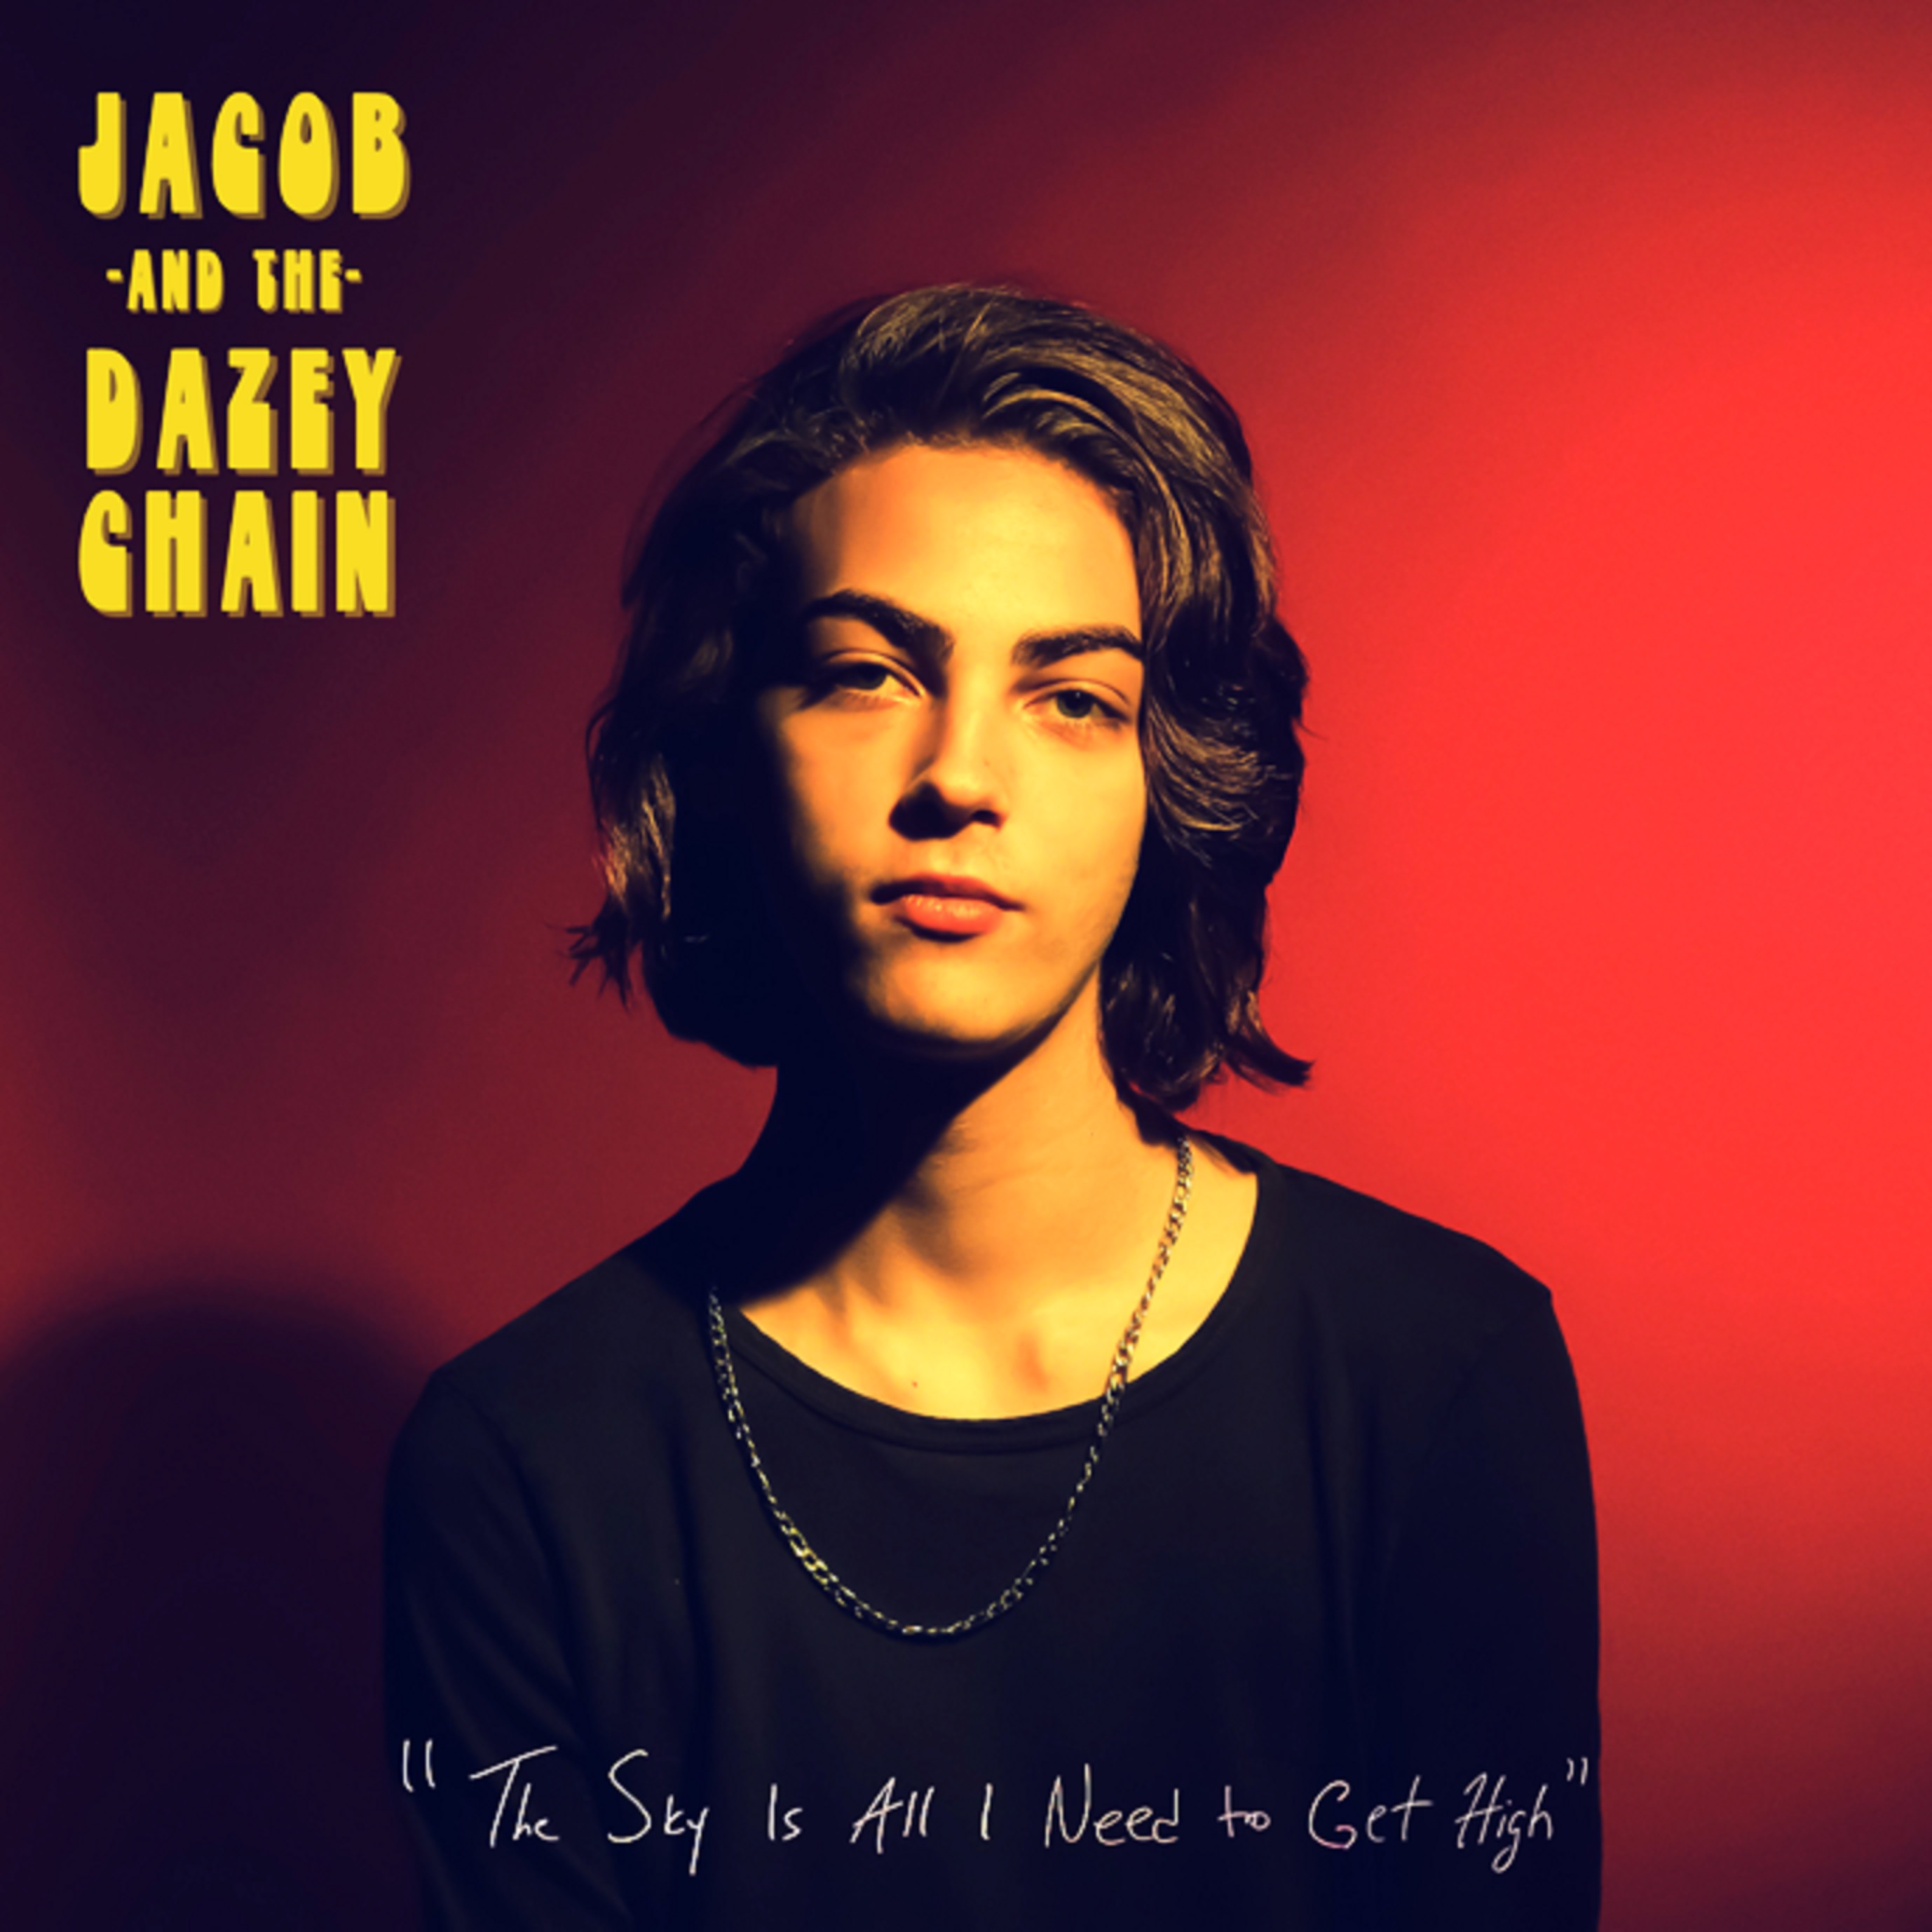 Jacob & The Dazey Chain ANNOUNCES DEBUT EP ‘THE SKY IS ALL I NEED TO GET HIGH’